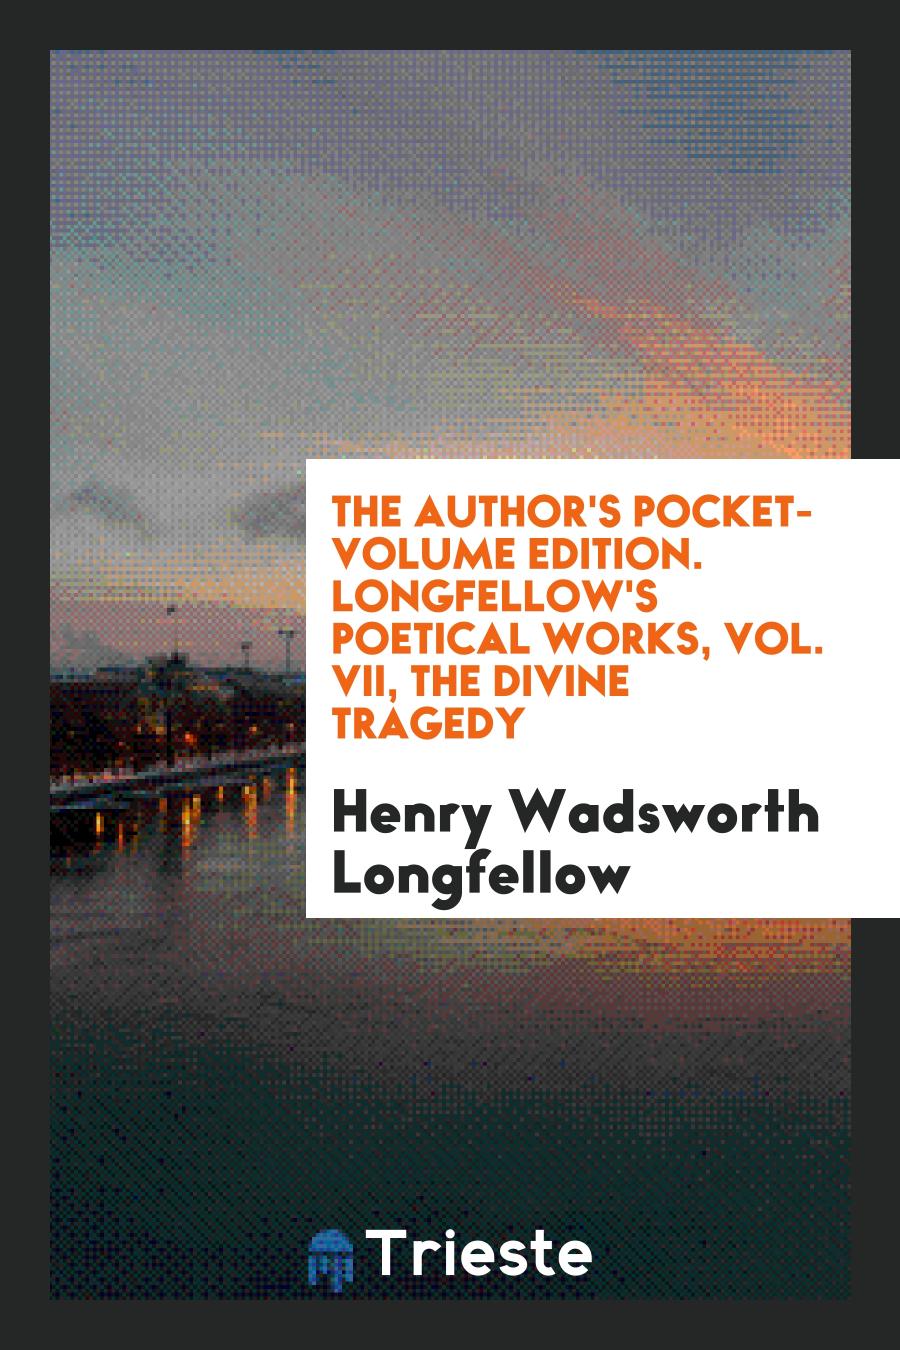 The author's pocket-volume edition. Longfellow's poetical works, Vol. VII, The divine tragedy